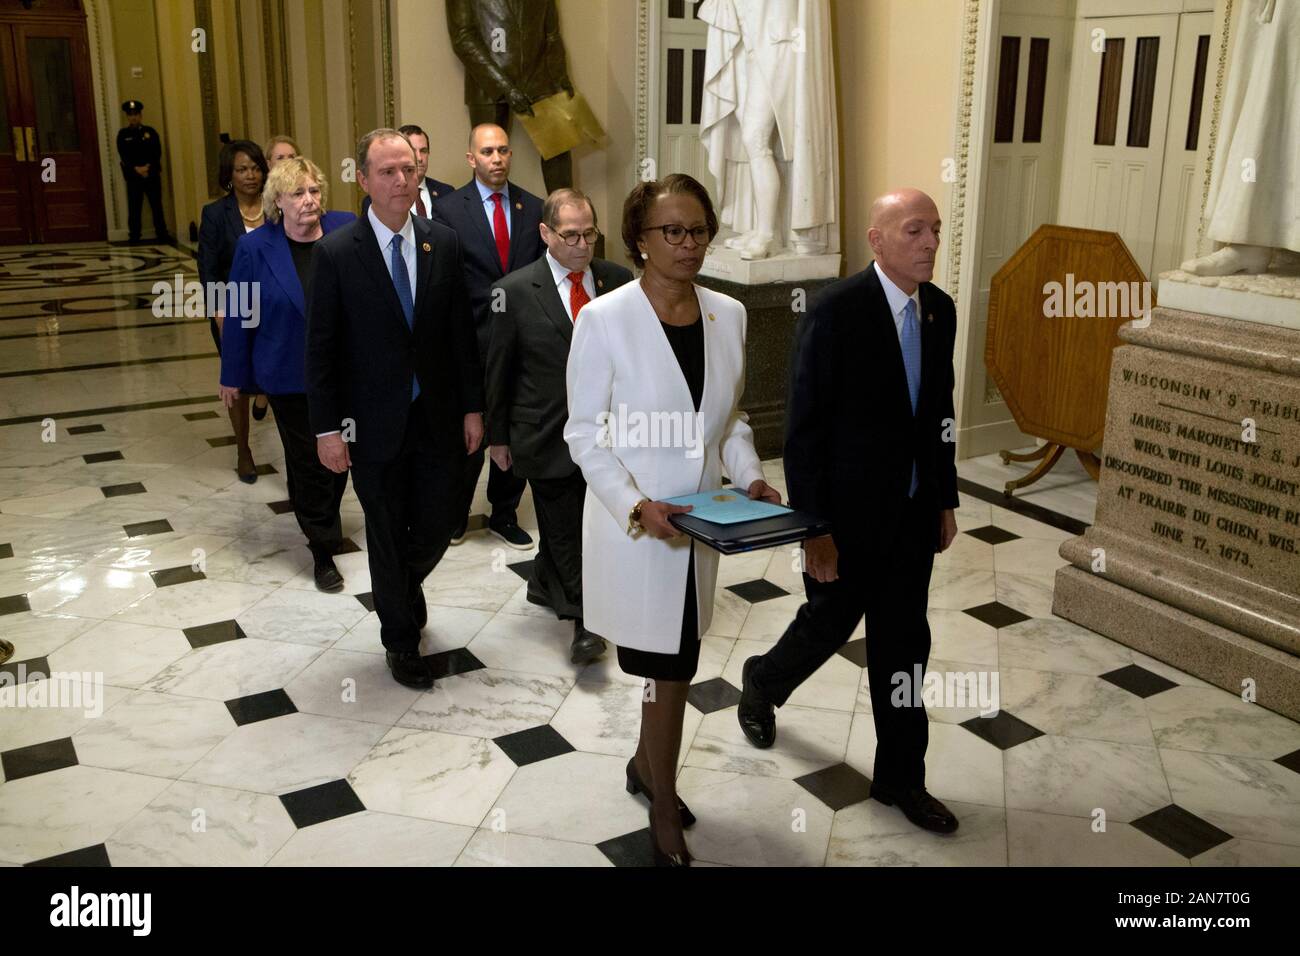 United States House Sergeant at Arms Paul Irving and Clerk of the US House Cheryl Johnson deliver the articles of impeachment against US President Donald J. Trump to the Secretary of the US Senate Julie Adams on Capitol Hill in Washington, DC, Wednesday, January 15, 2020. Following are impeachment managers, US Representative Jerrold Nadler (Democrat of New York), Chairman, US House Judiciary Committee; US Representative Adam Schiff (Democrat of California), Chairman, US House Permanent Select Committee on Intelligence; US Representative Hakeem Jeffries (Democrat of New York); US Representative Stock Photo